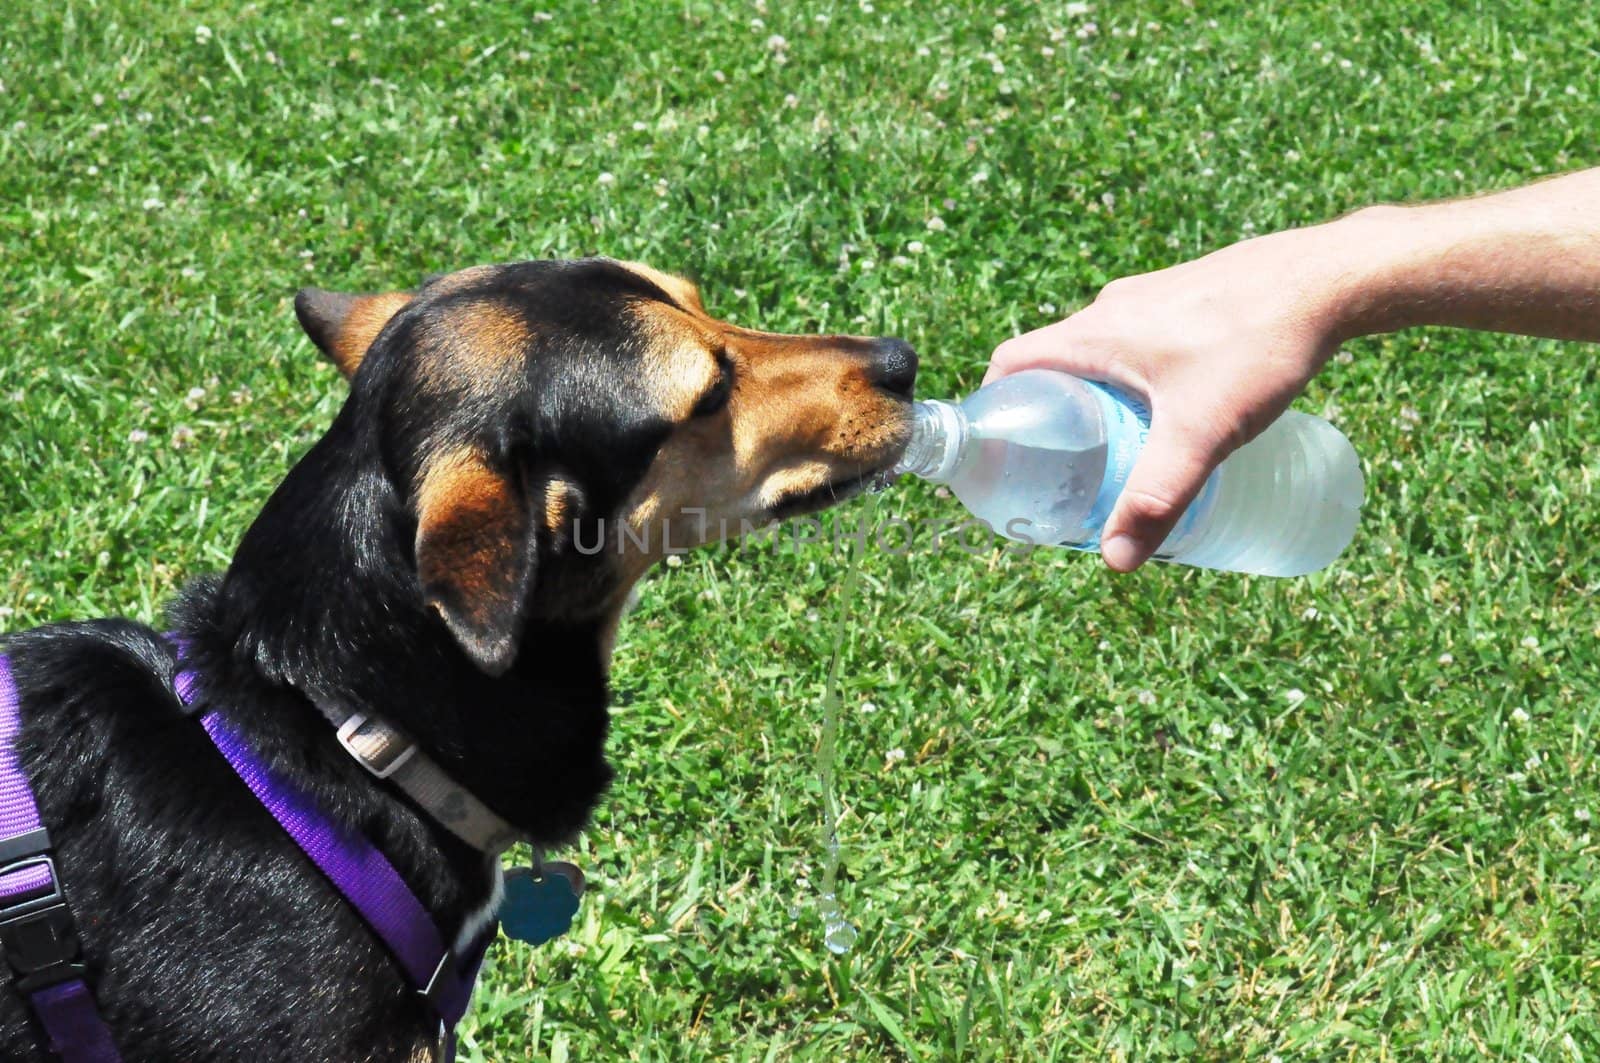 Dog drinking water by RefocusPhoto